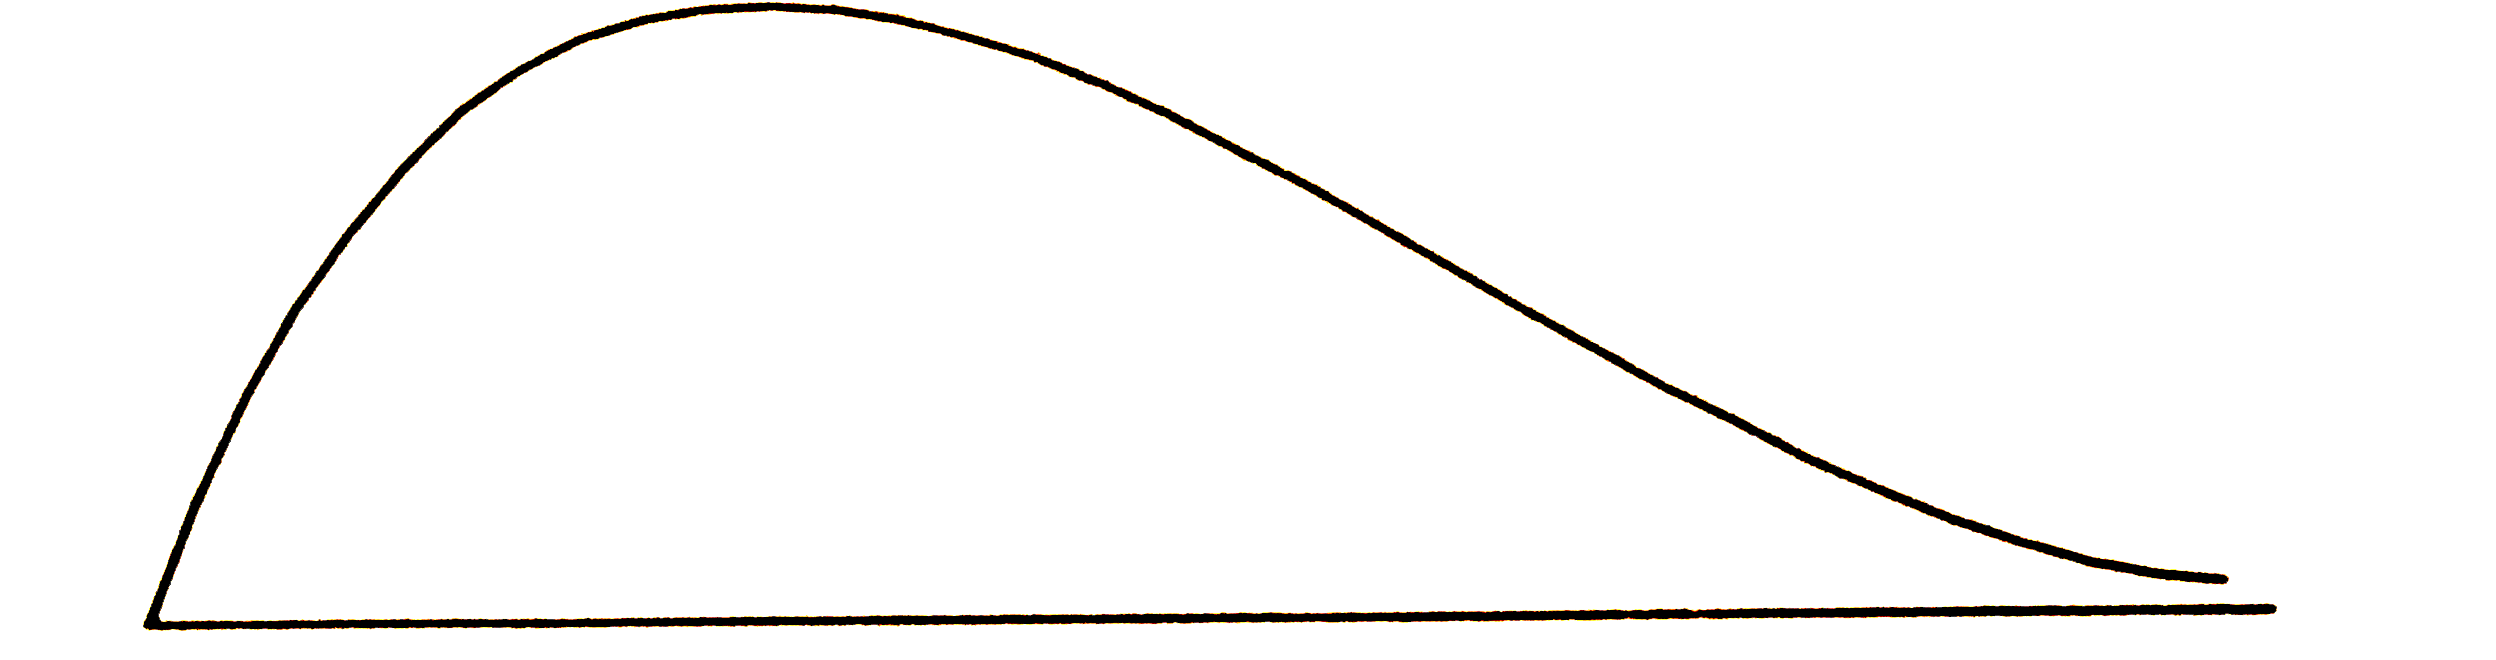 The frequency curve for the distribution of income in a region is positively skewed as shown in the figure above. Then, for this distribution